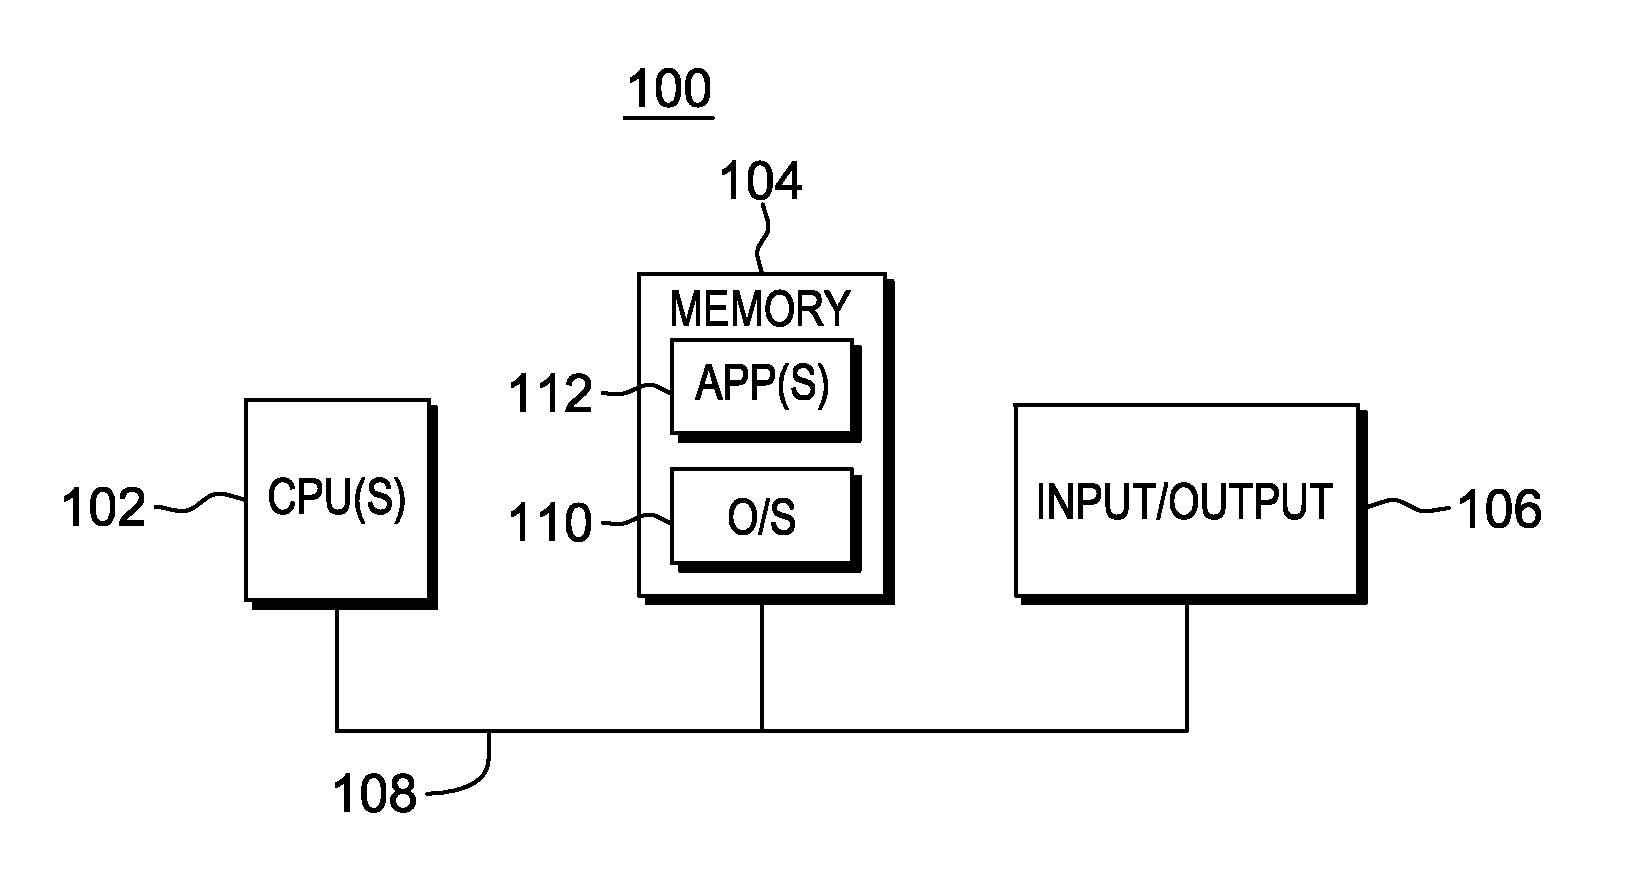 Physical memory fault mitigation in a computing environment